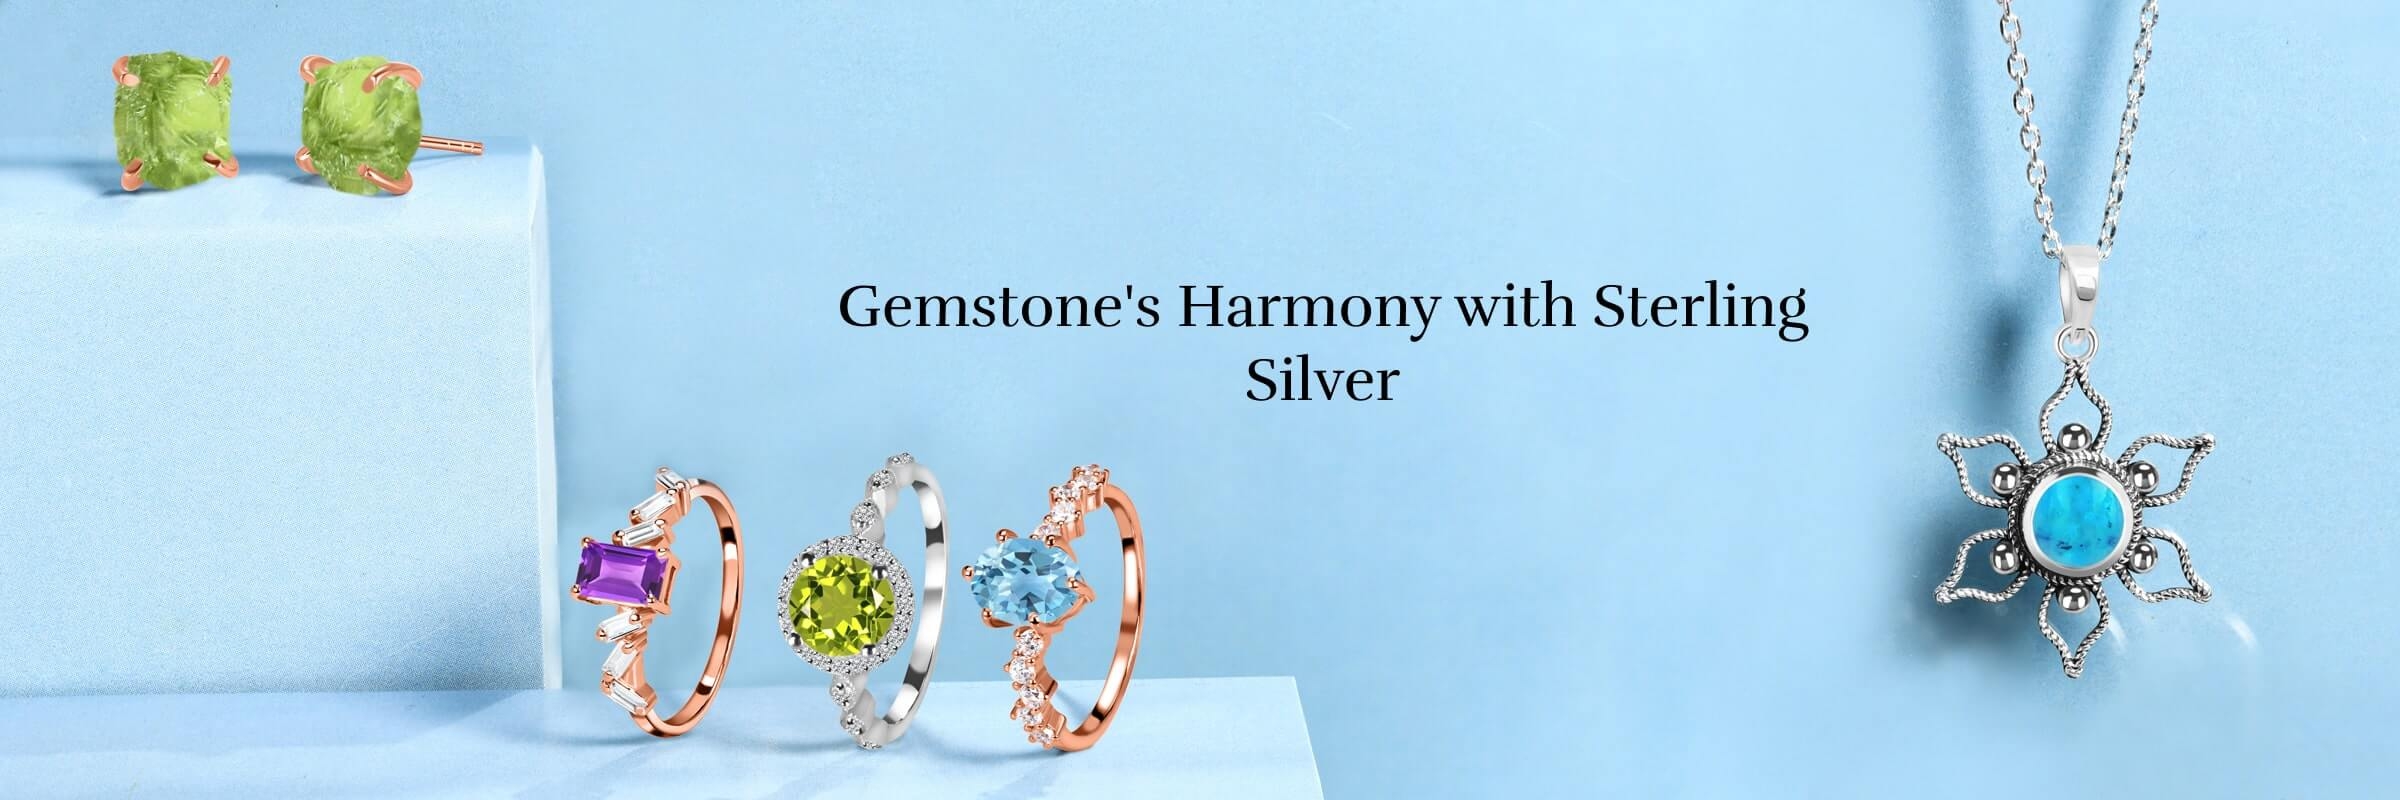 Gemstone Works Best With Sterling Silver Jewelry